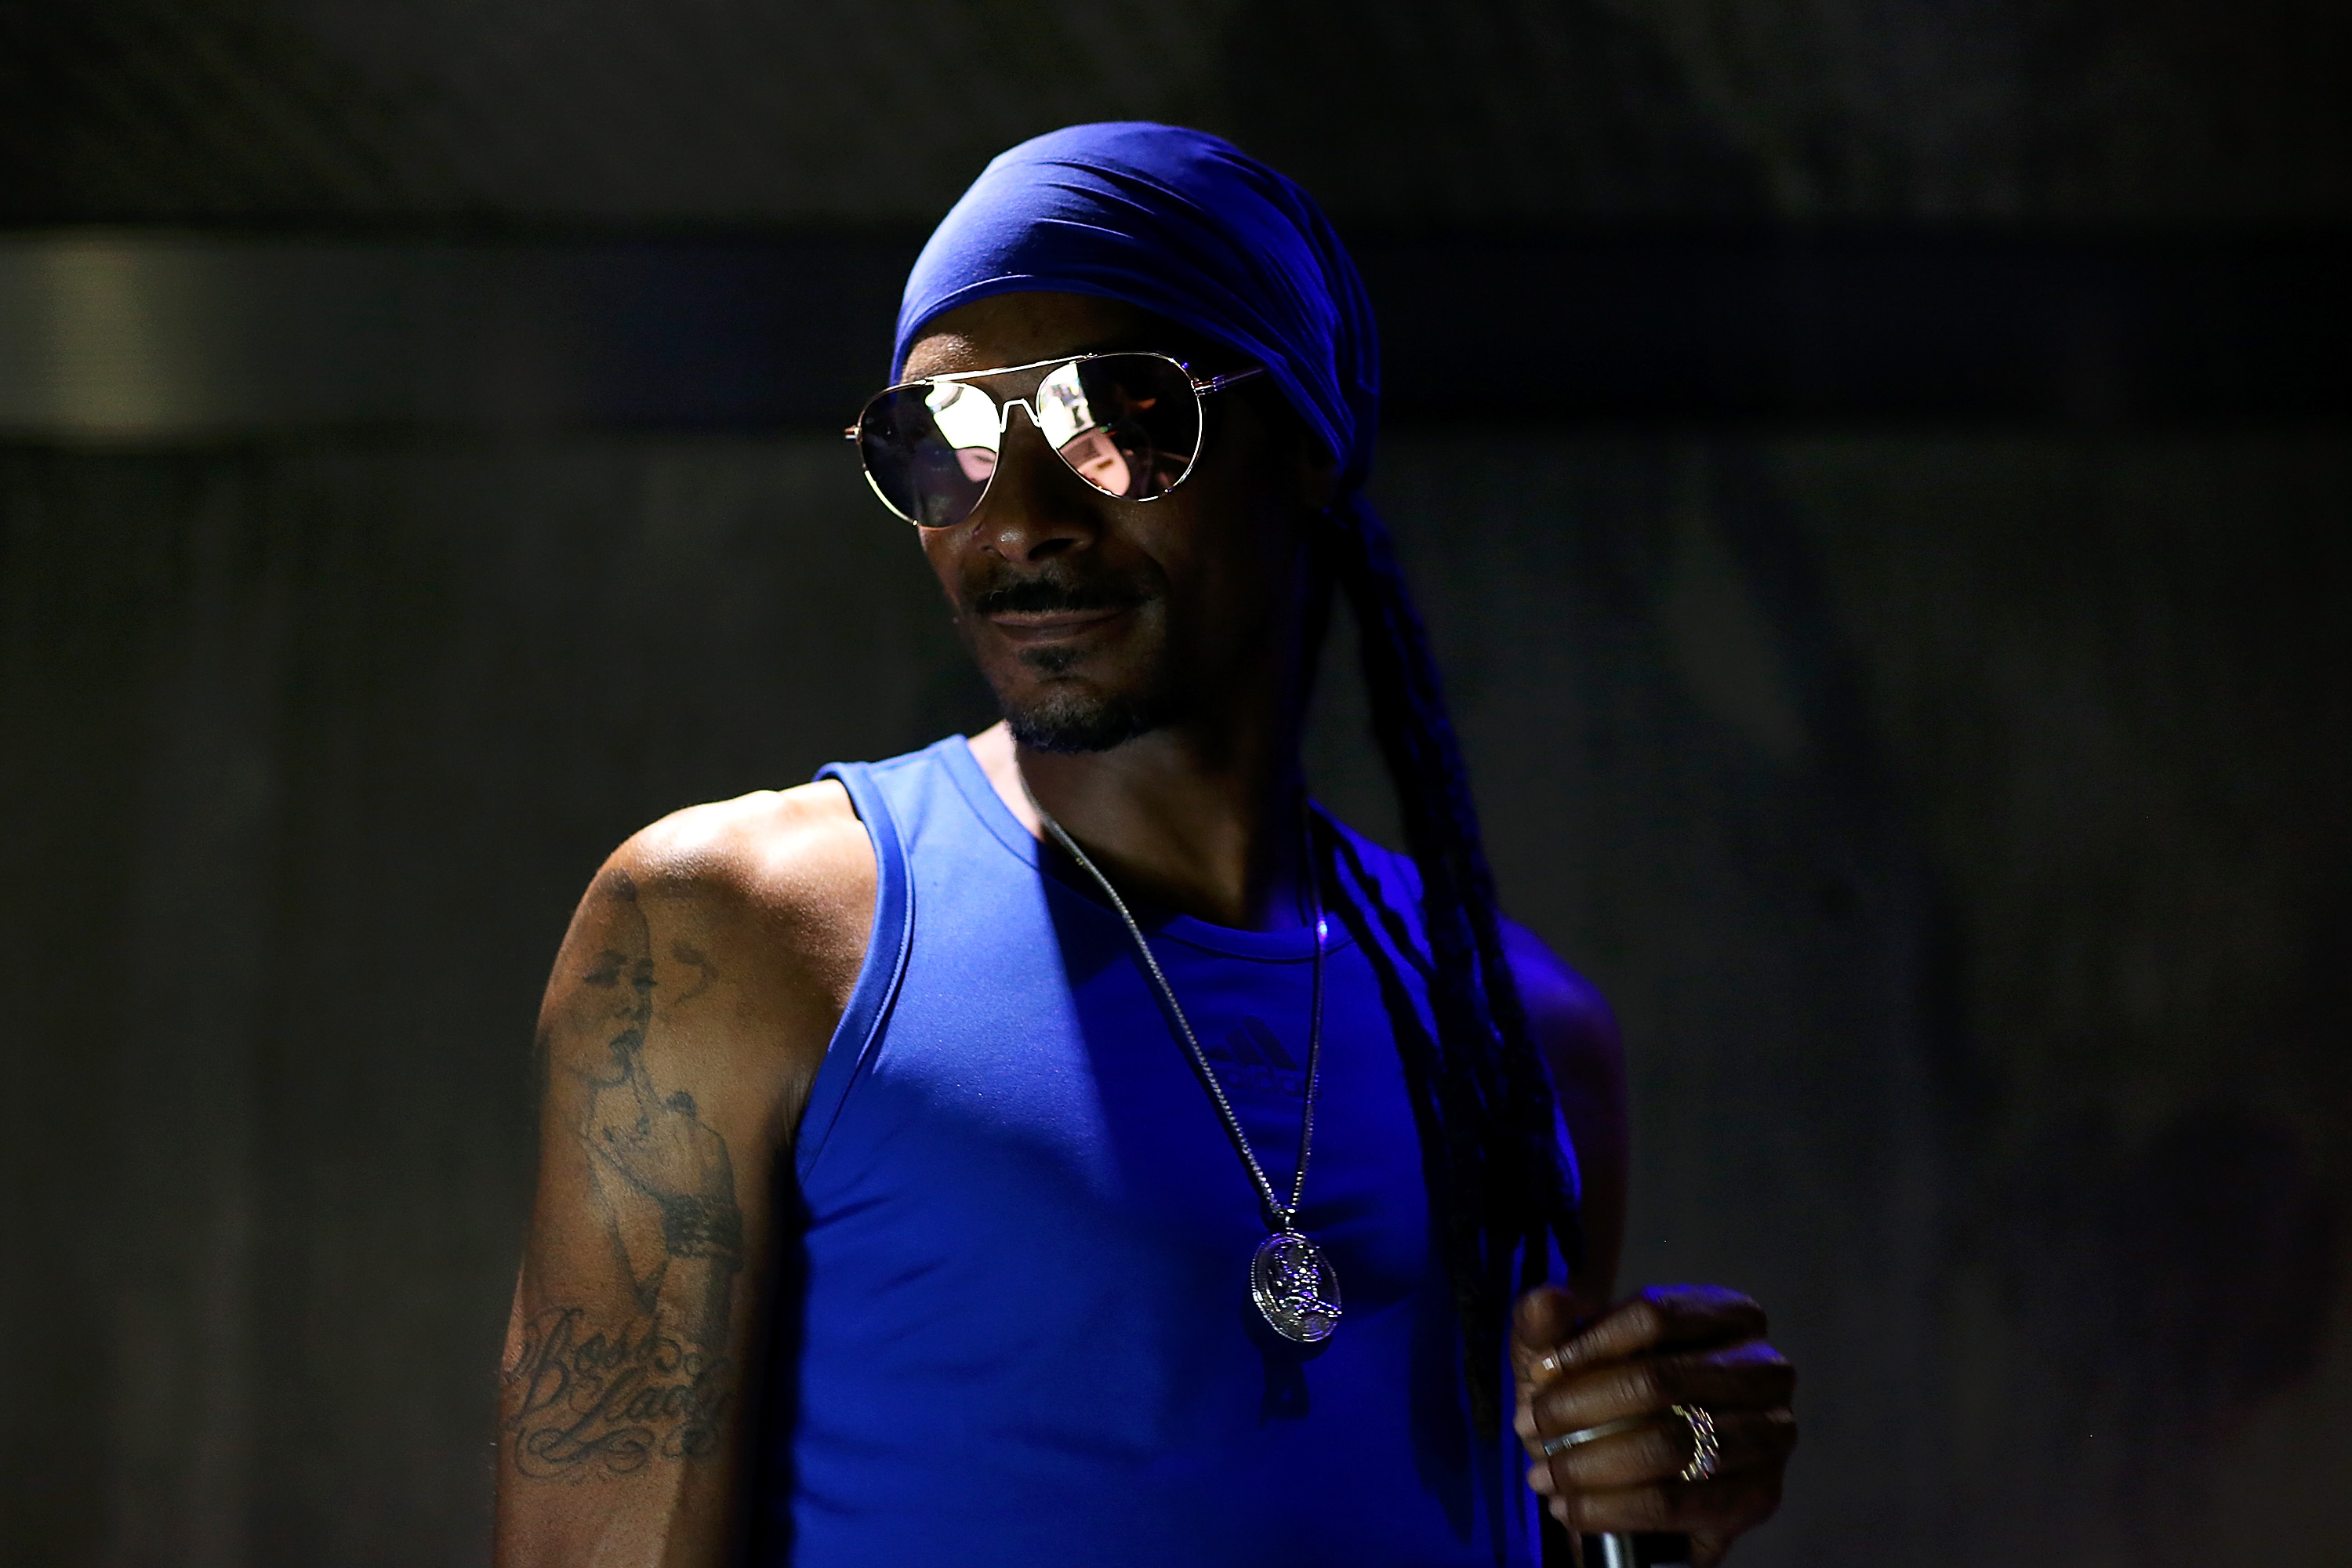 Snoop Dogg Sparks Up A Blunt At The White House